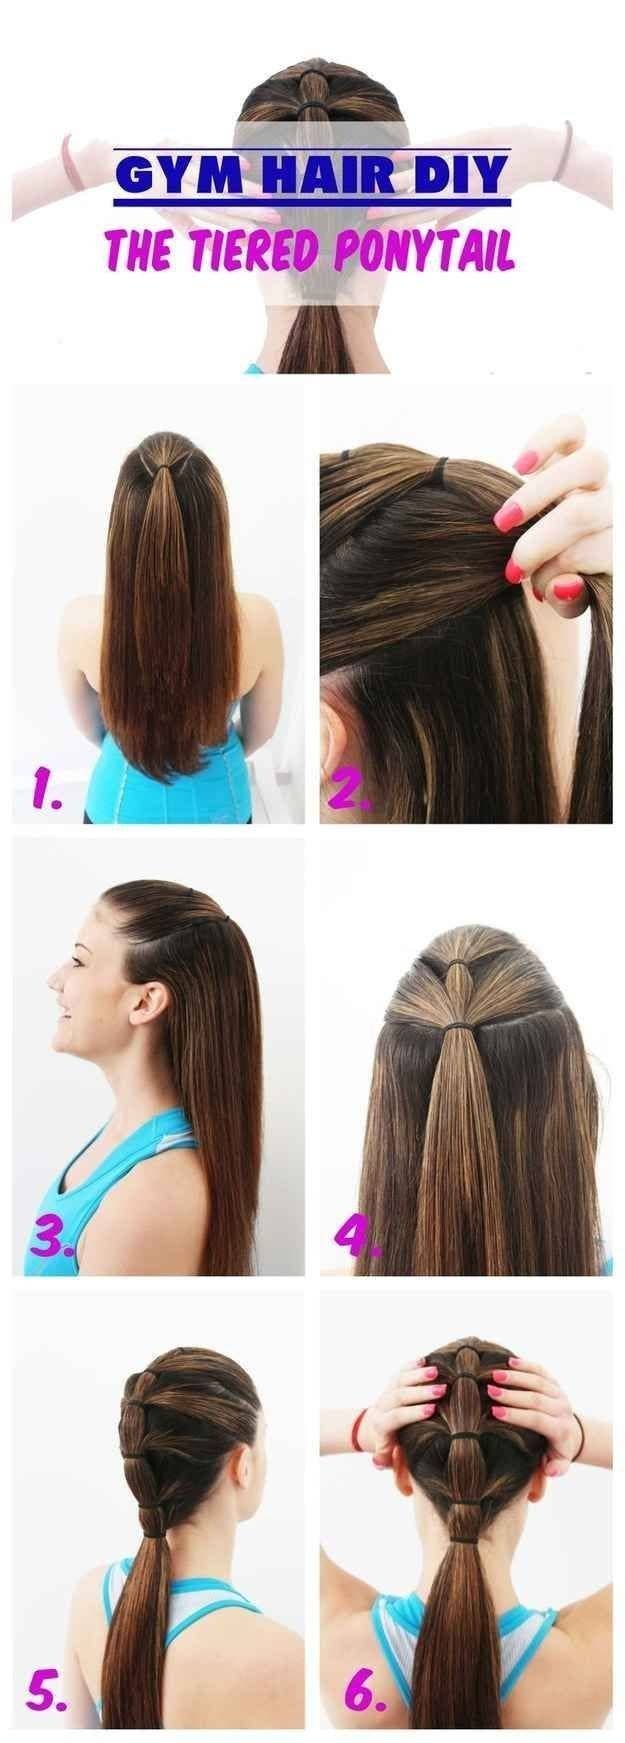 18 ways to get your bangs out of your face